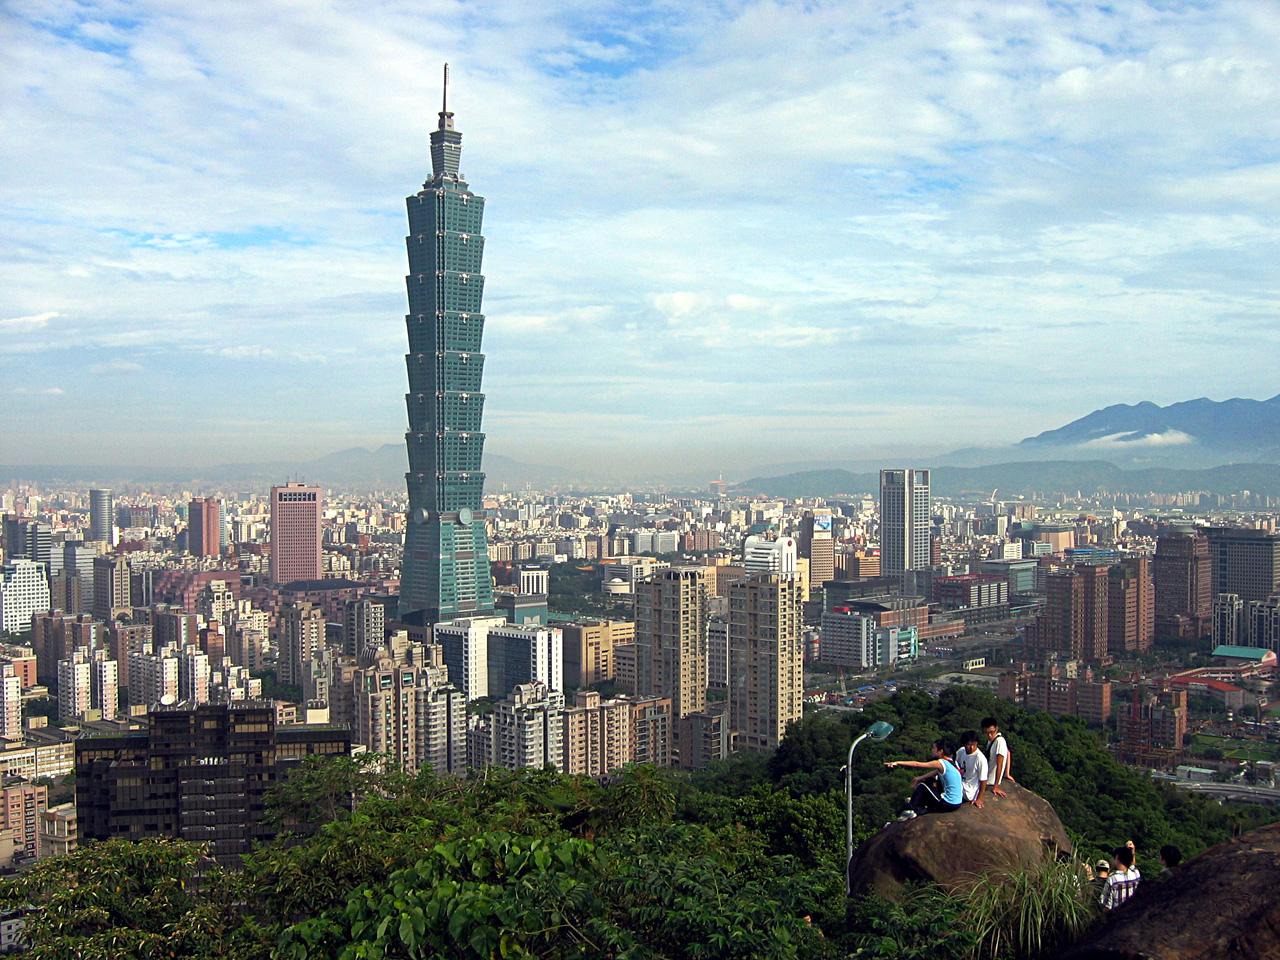 Taiwan is frequently subjected to seismic shocks due to its location on the cusp of the Pacific "ring of fire"